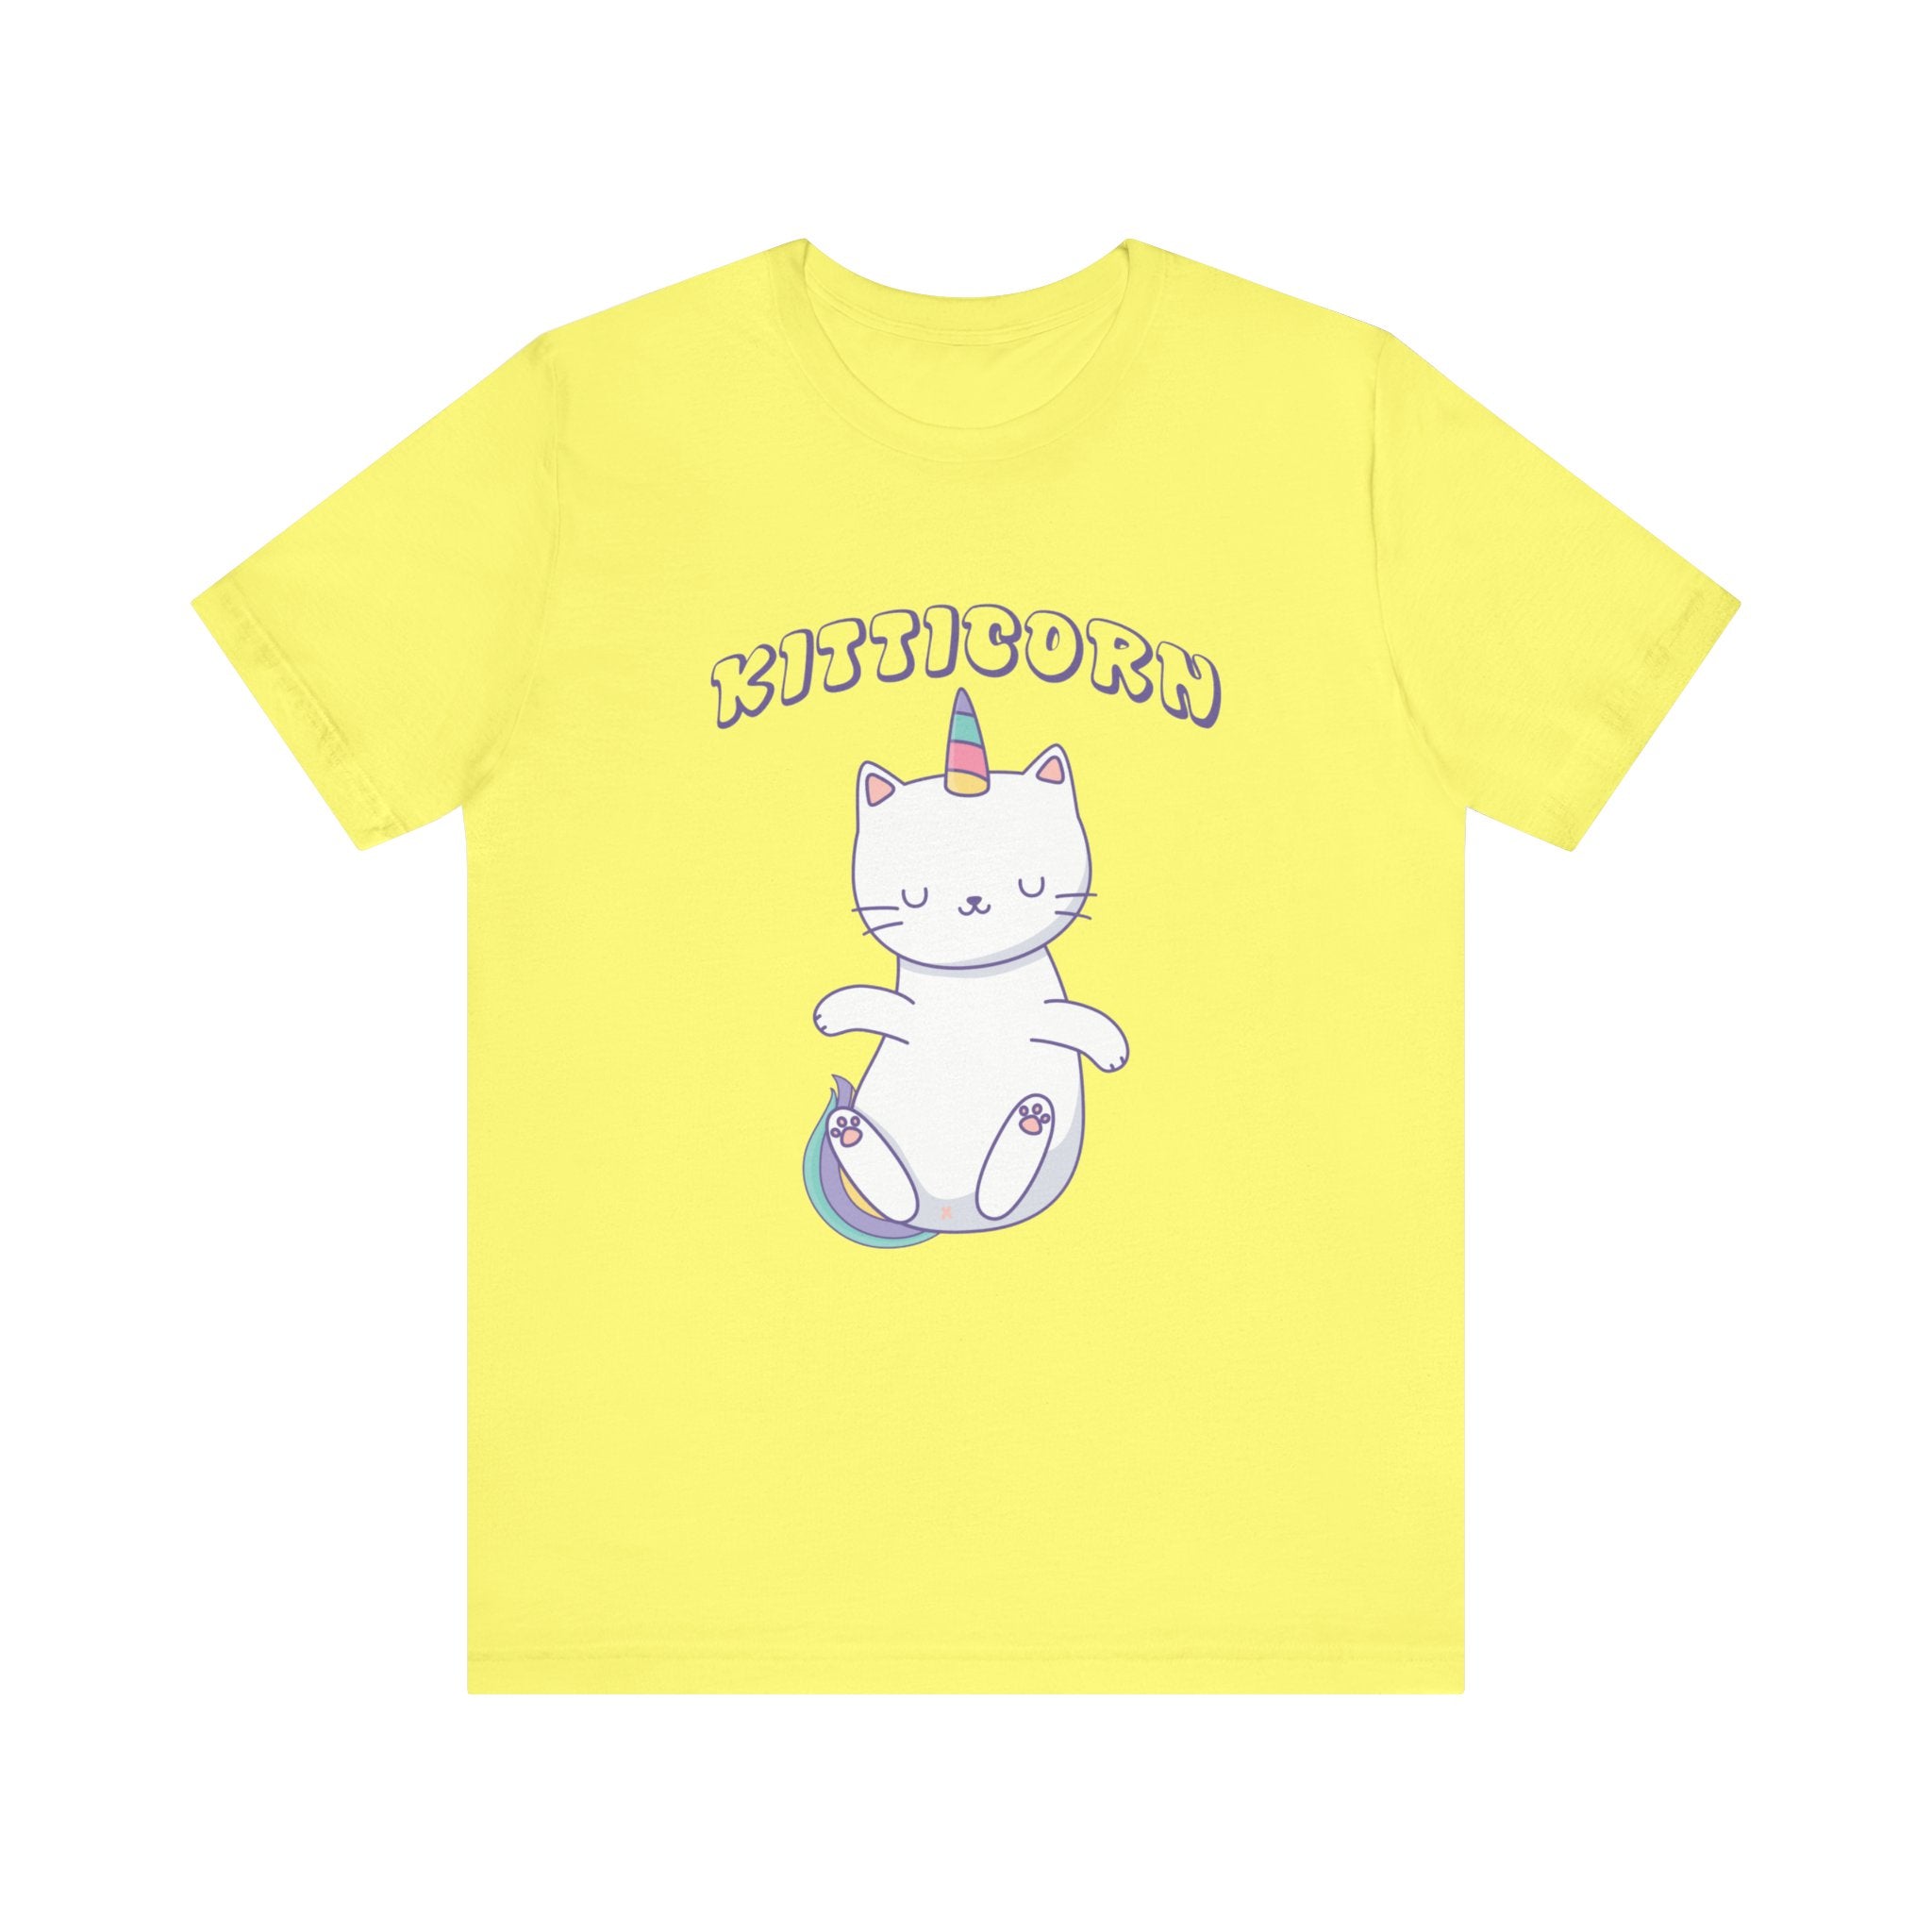 A yellow unisex Kitticorn tee featuring a graphic of a cartoon cat with a unicorn horn sitting on a cloud, with the word "kitticorn" printed above.